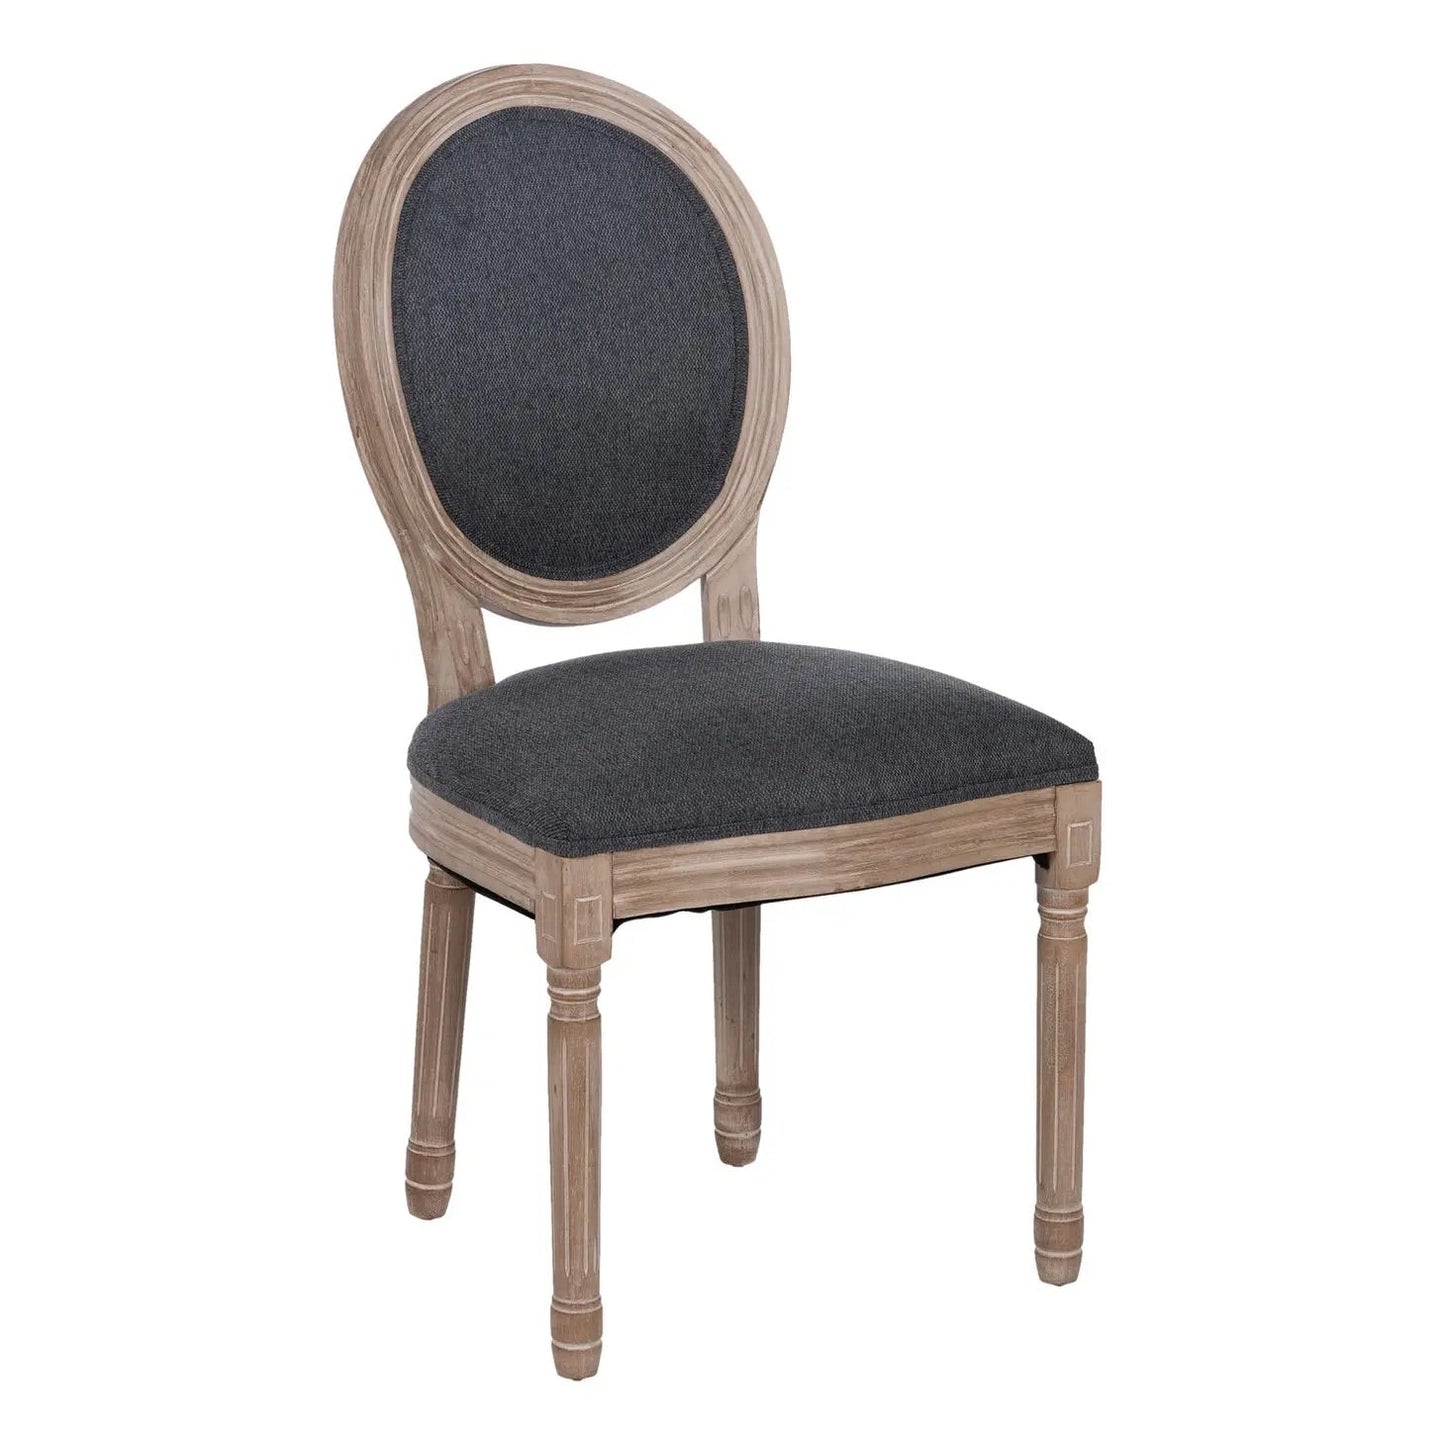 Round/Oval Medallion Chair, Beige/Charcoal (S/2)